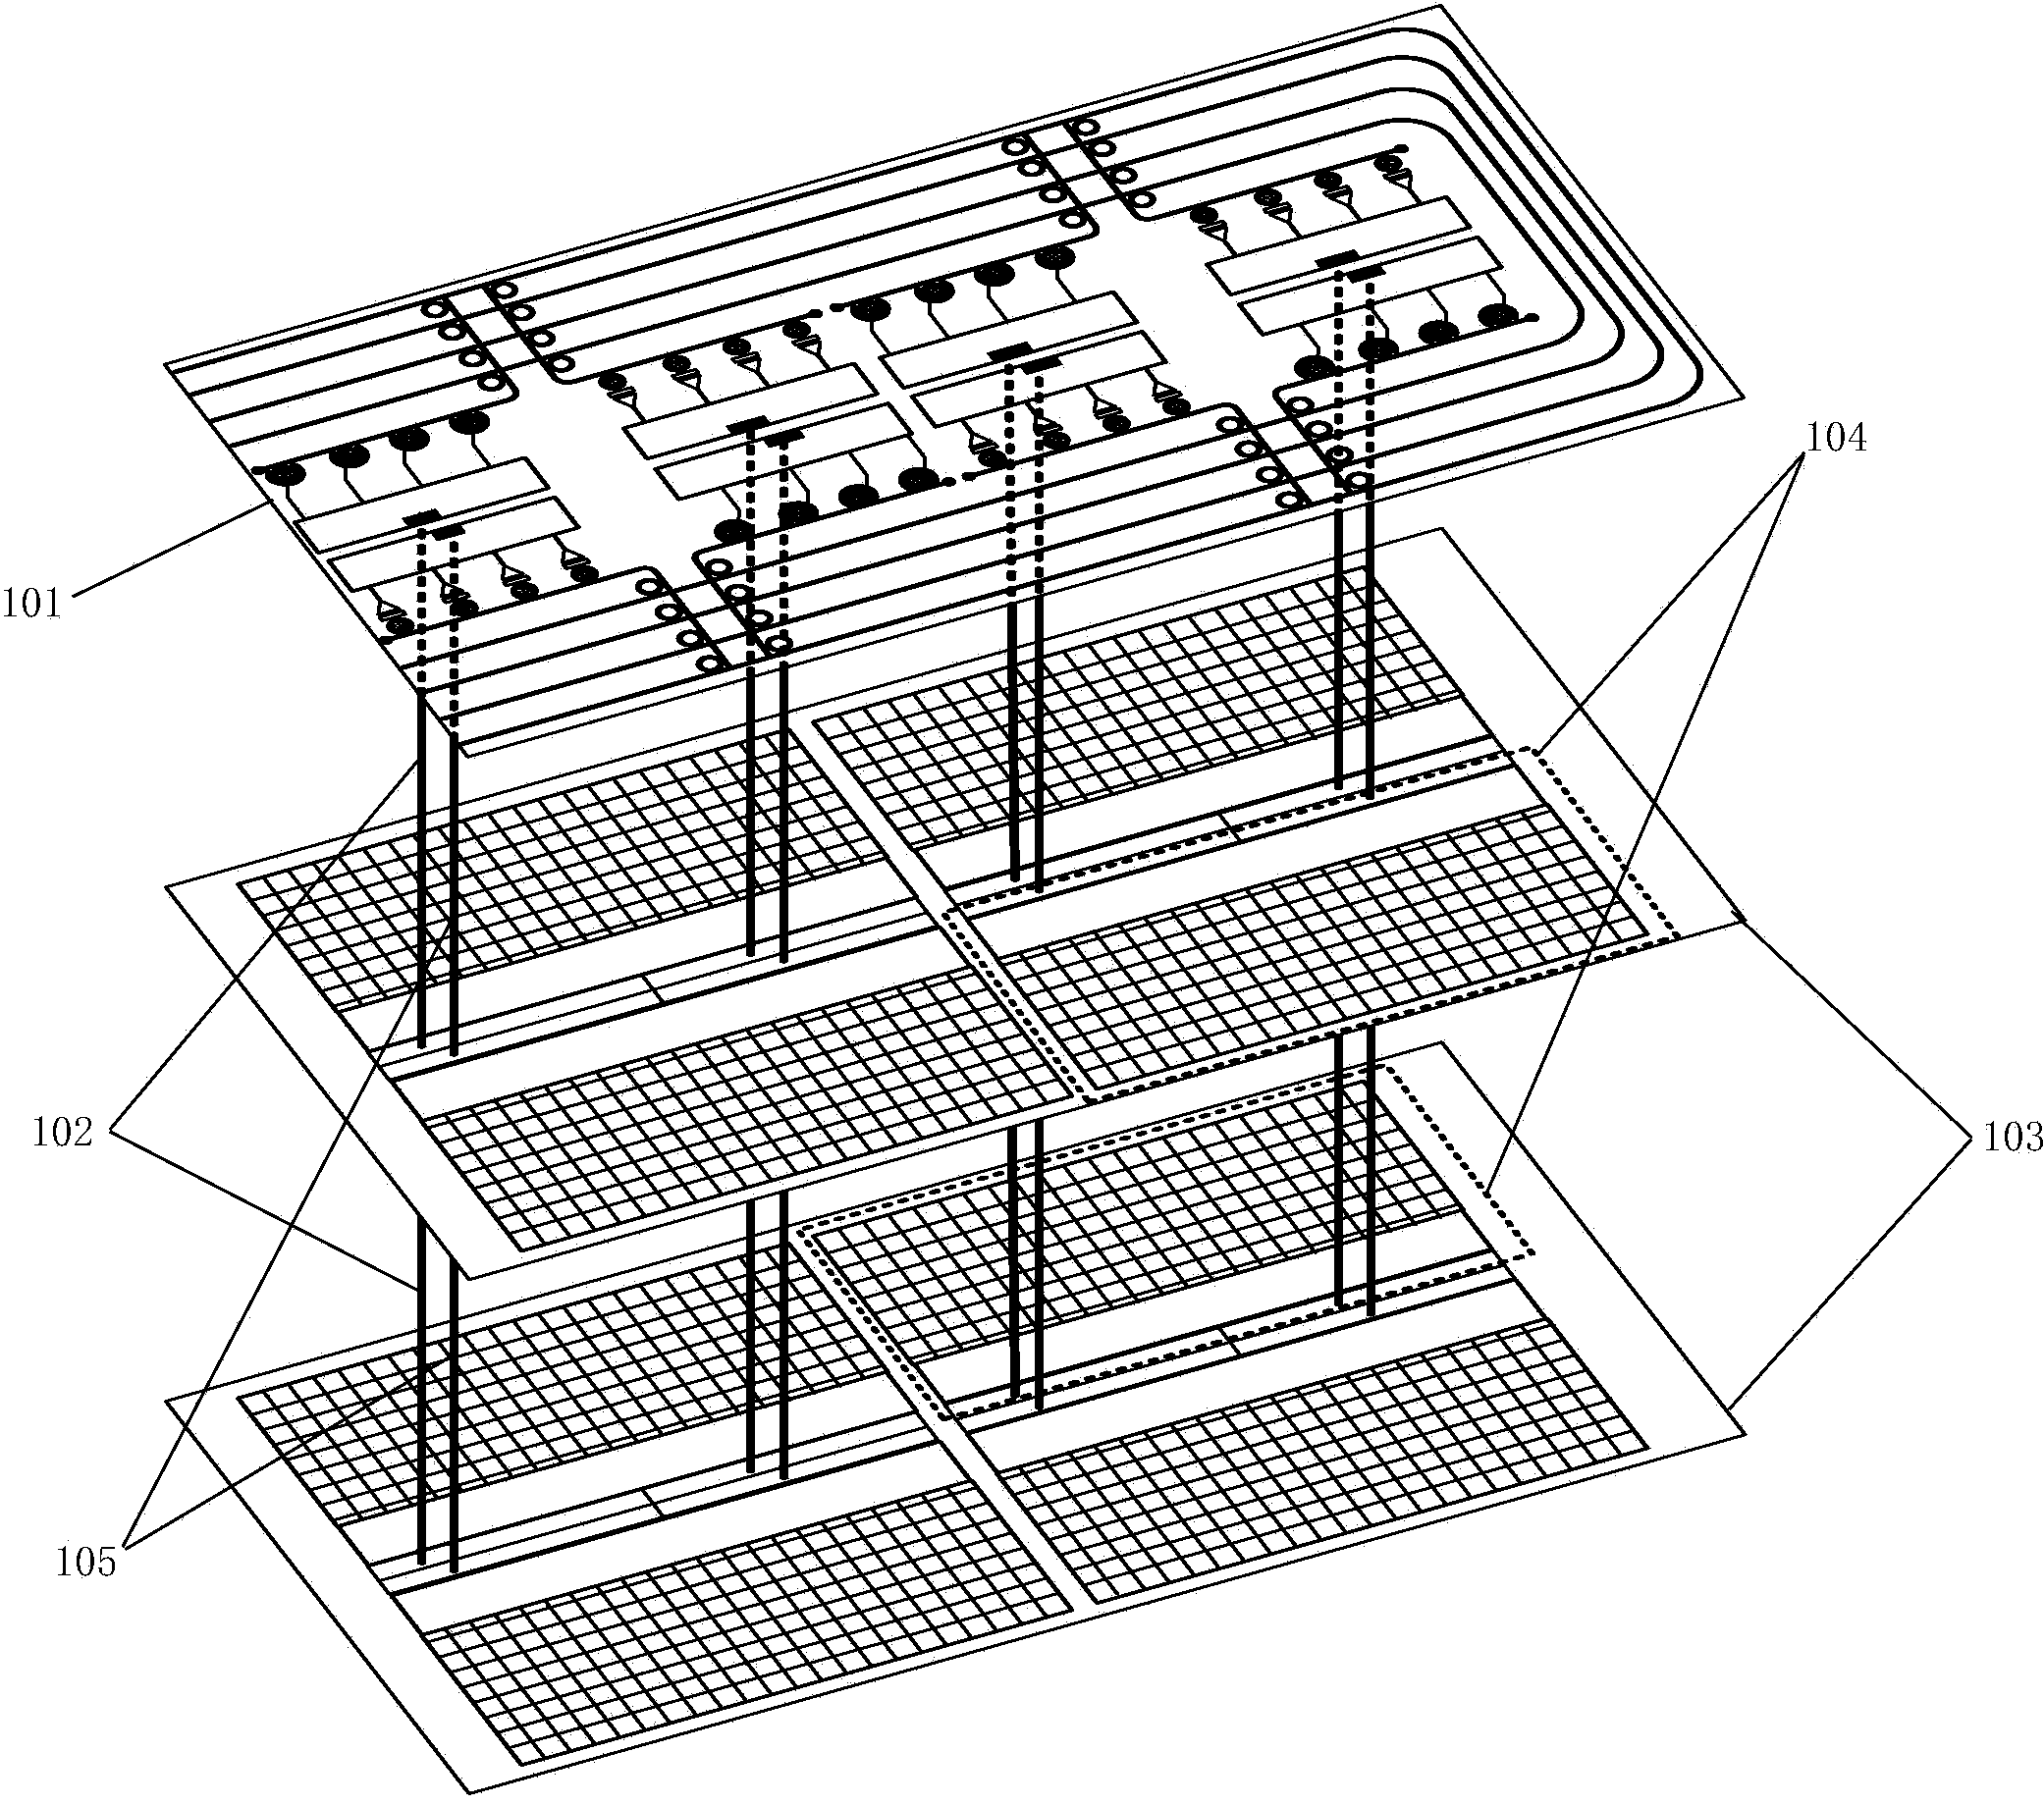 Parallel access memory system based on optical interconnection